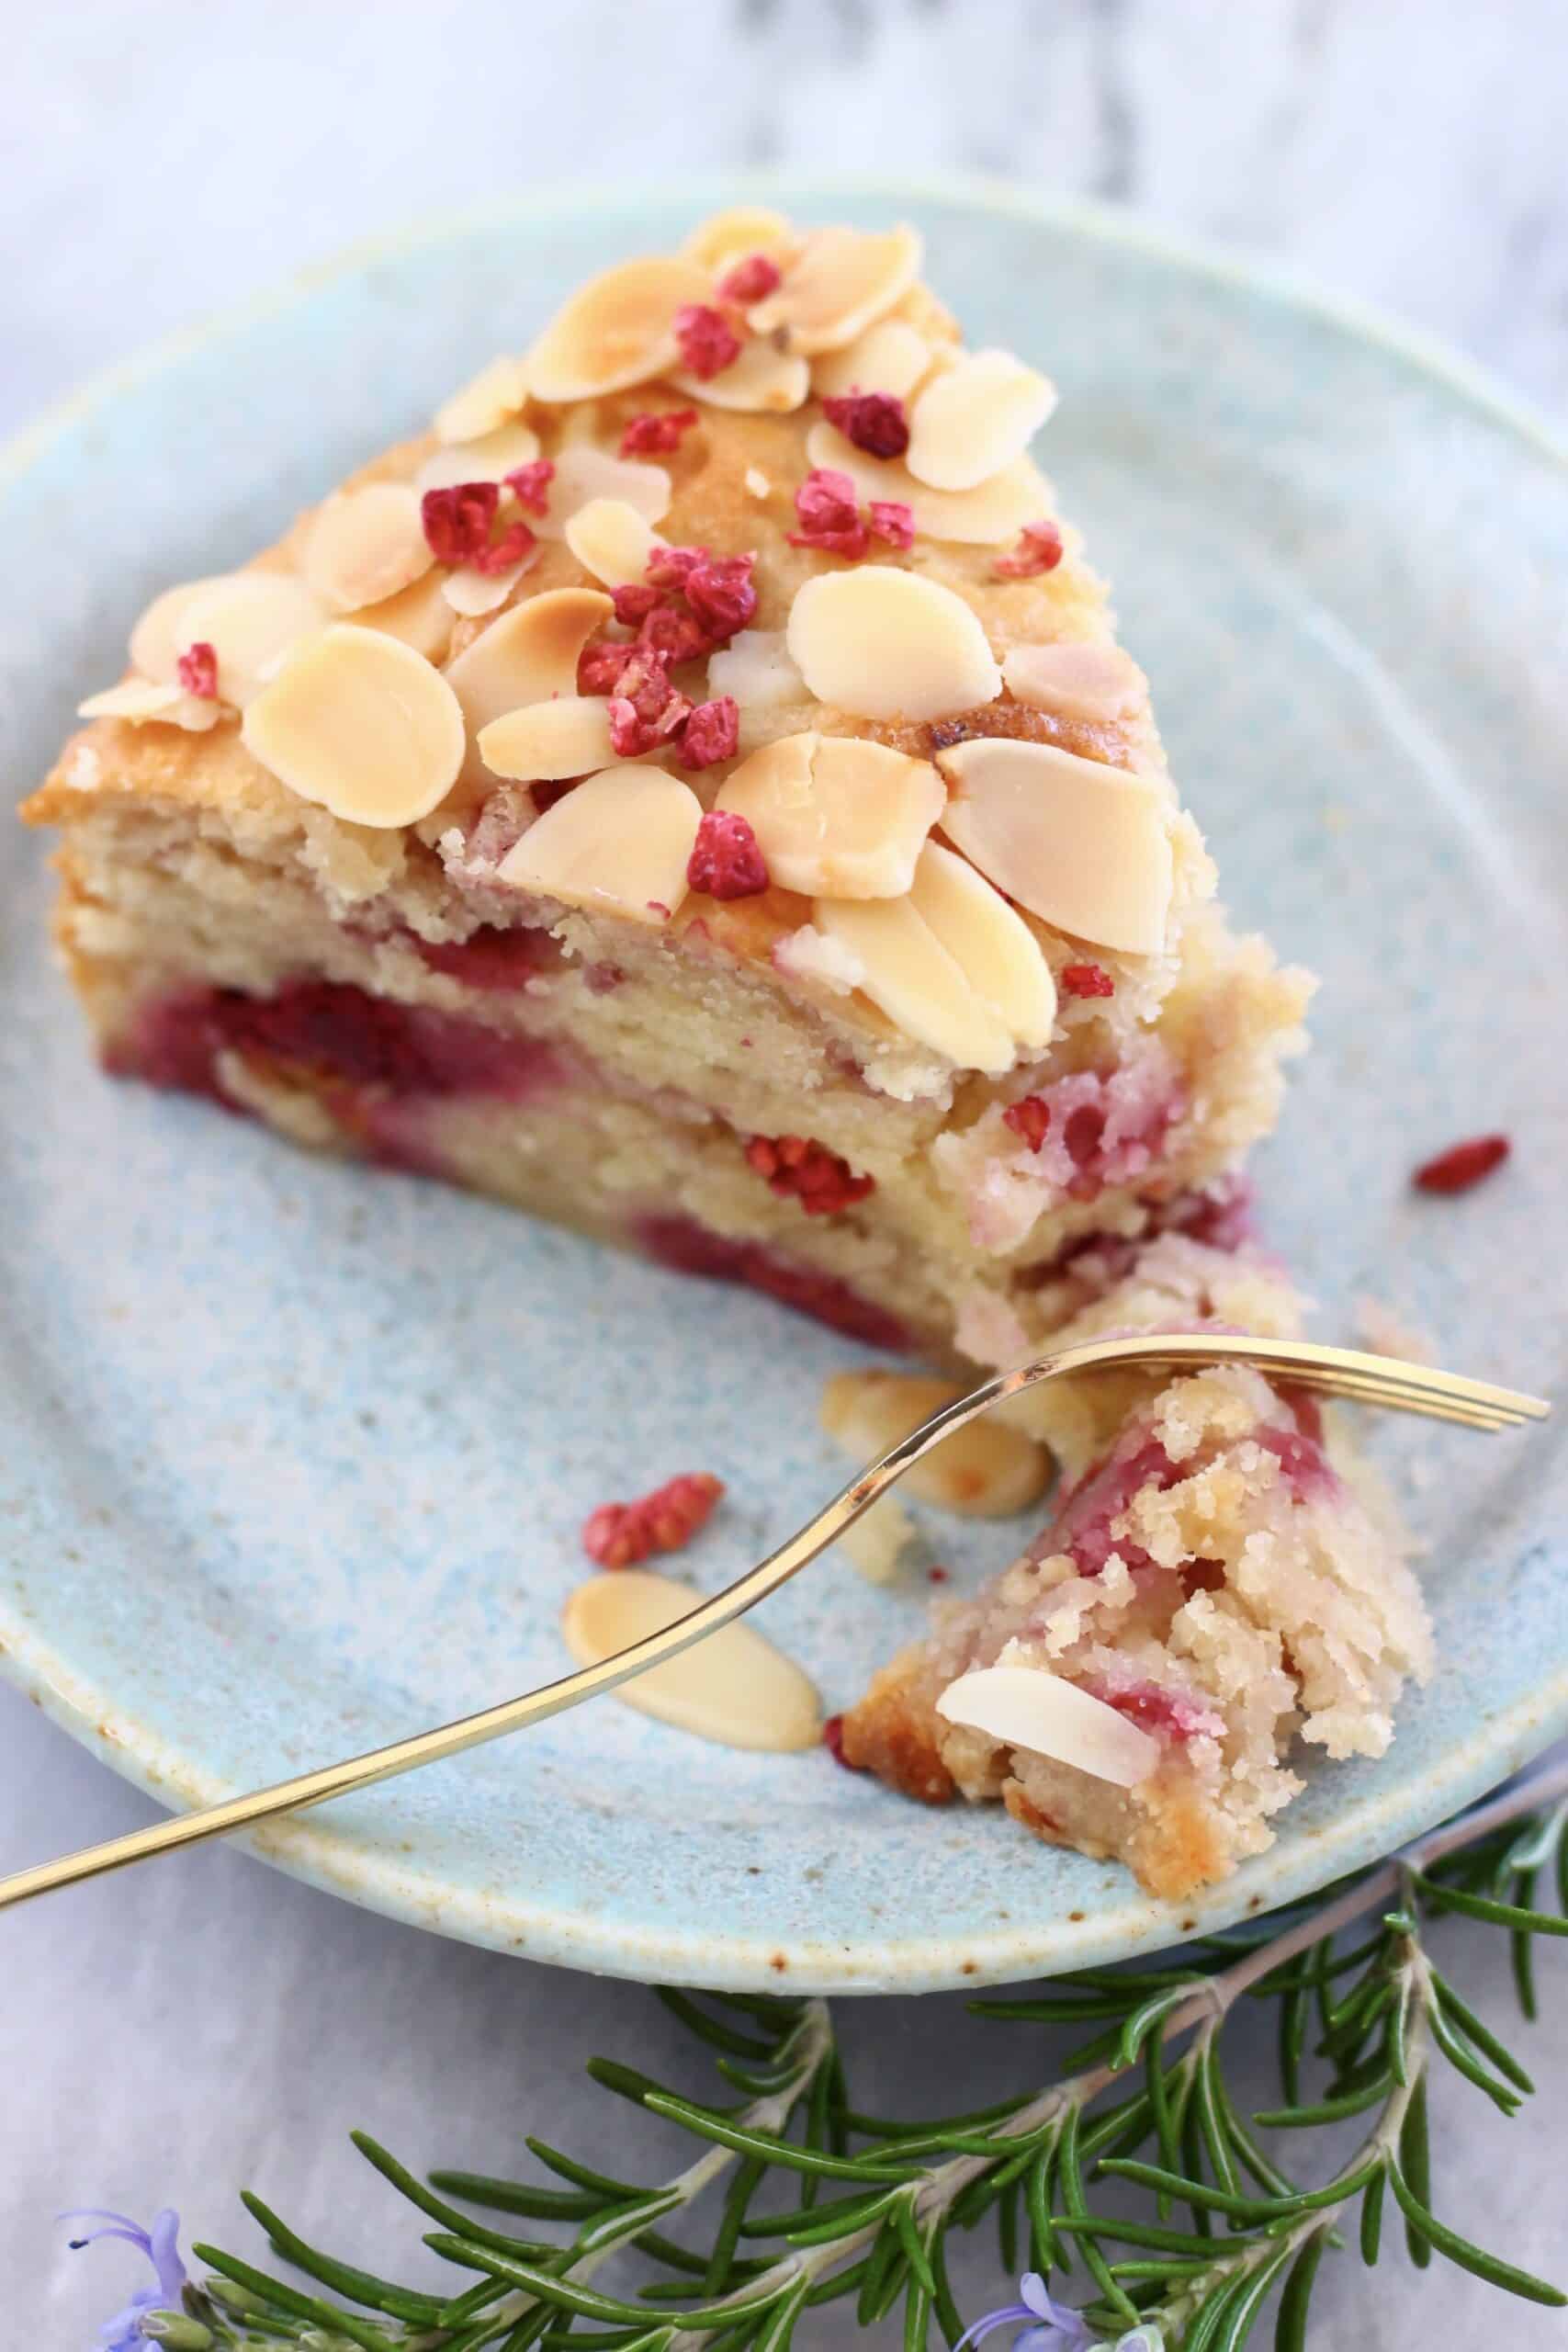 A slice of gluten-free vegan raspberry cake on a plate with a gold fork taking a bite